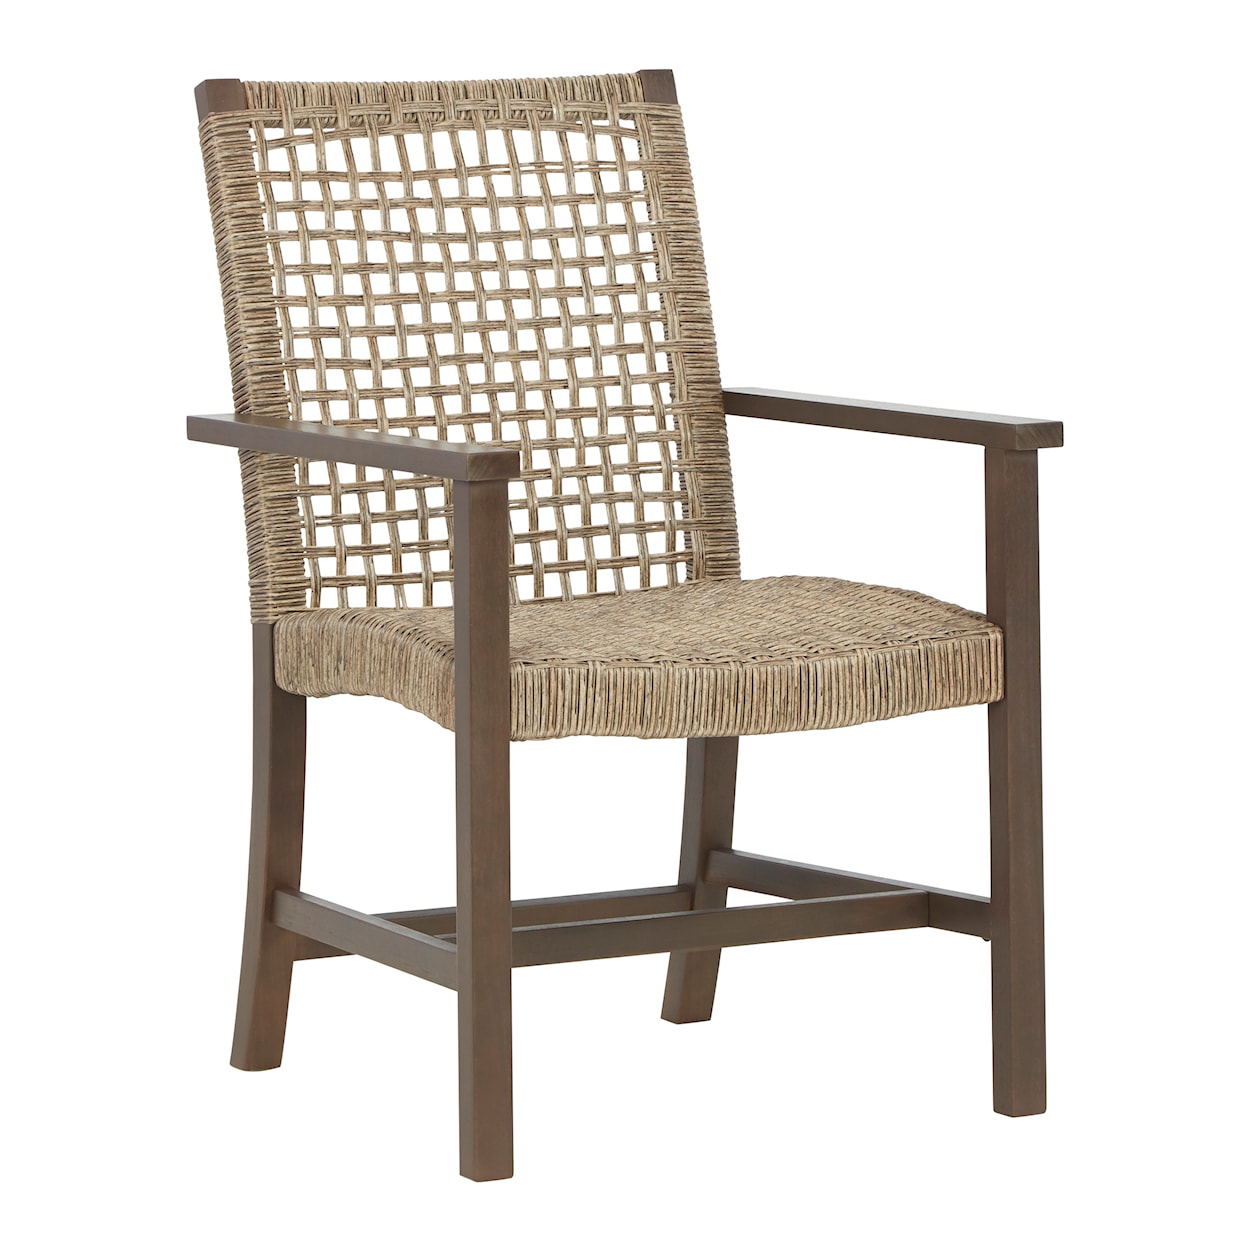 Michael Alan Select Germalia Outdoor Dining Arm Chair (Set of 2)